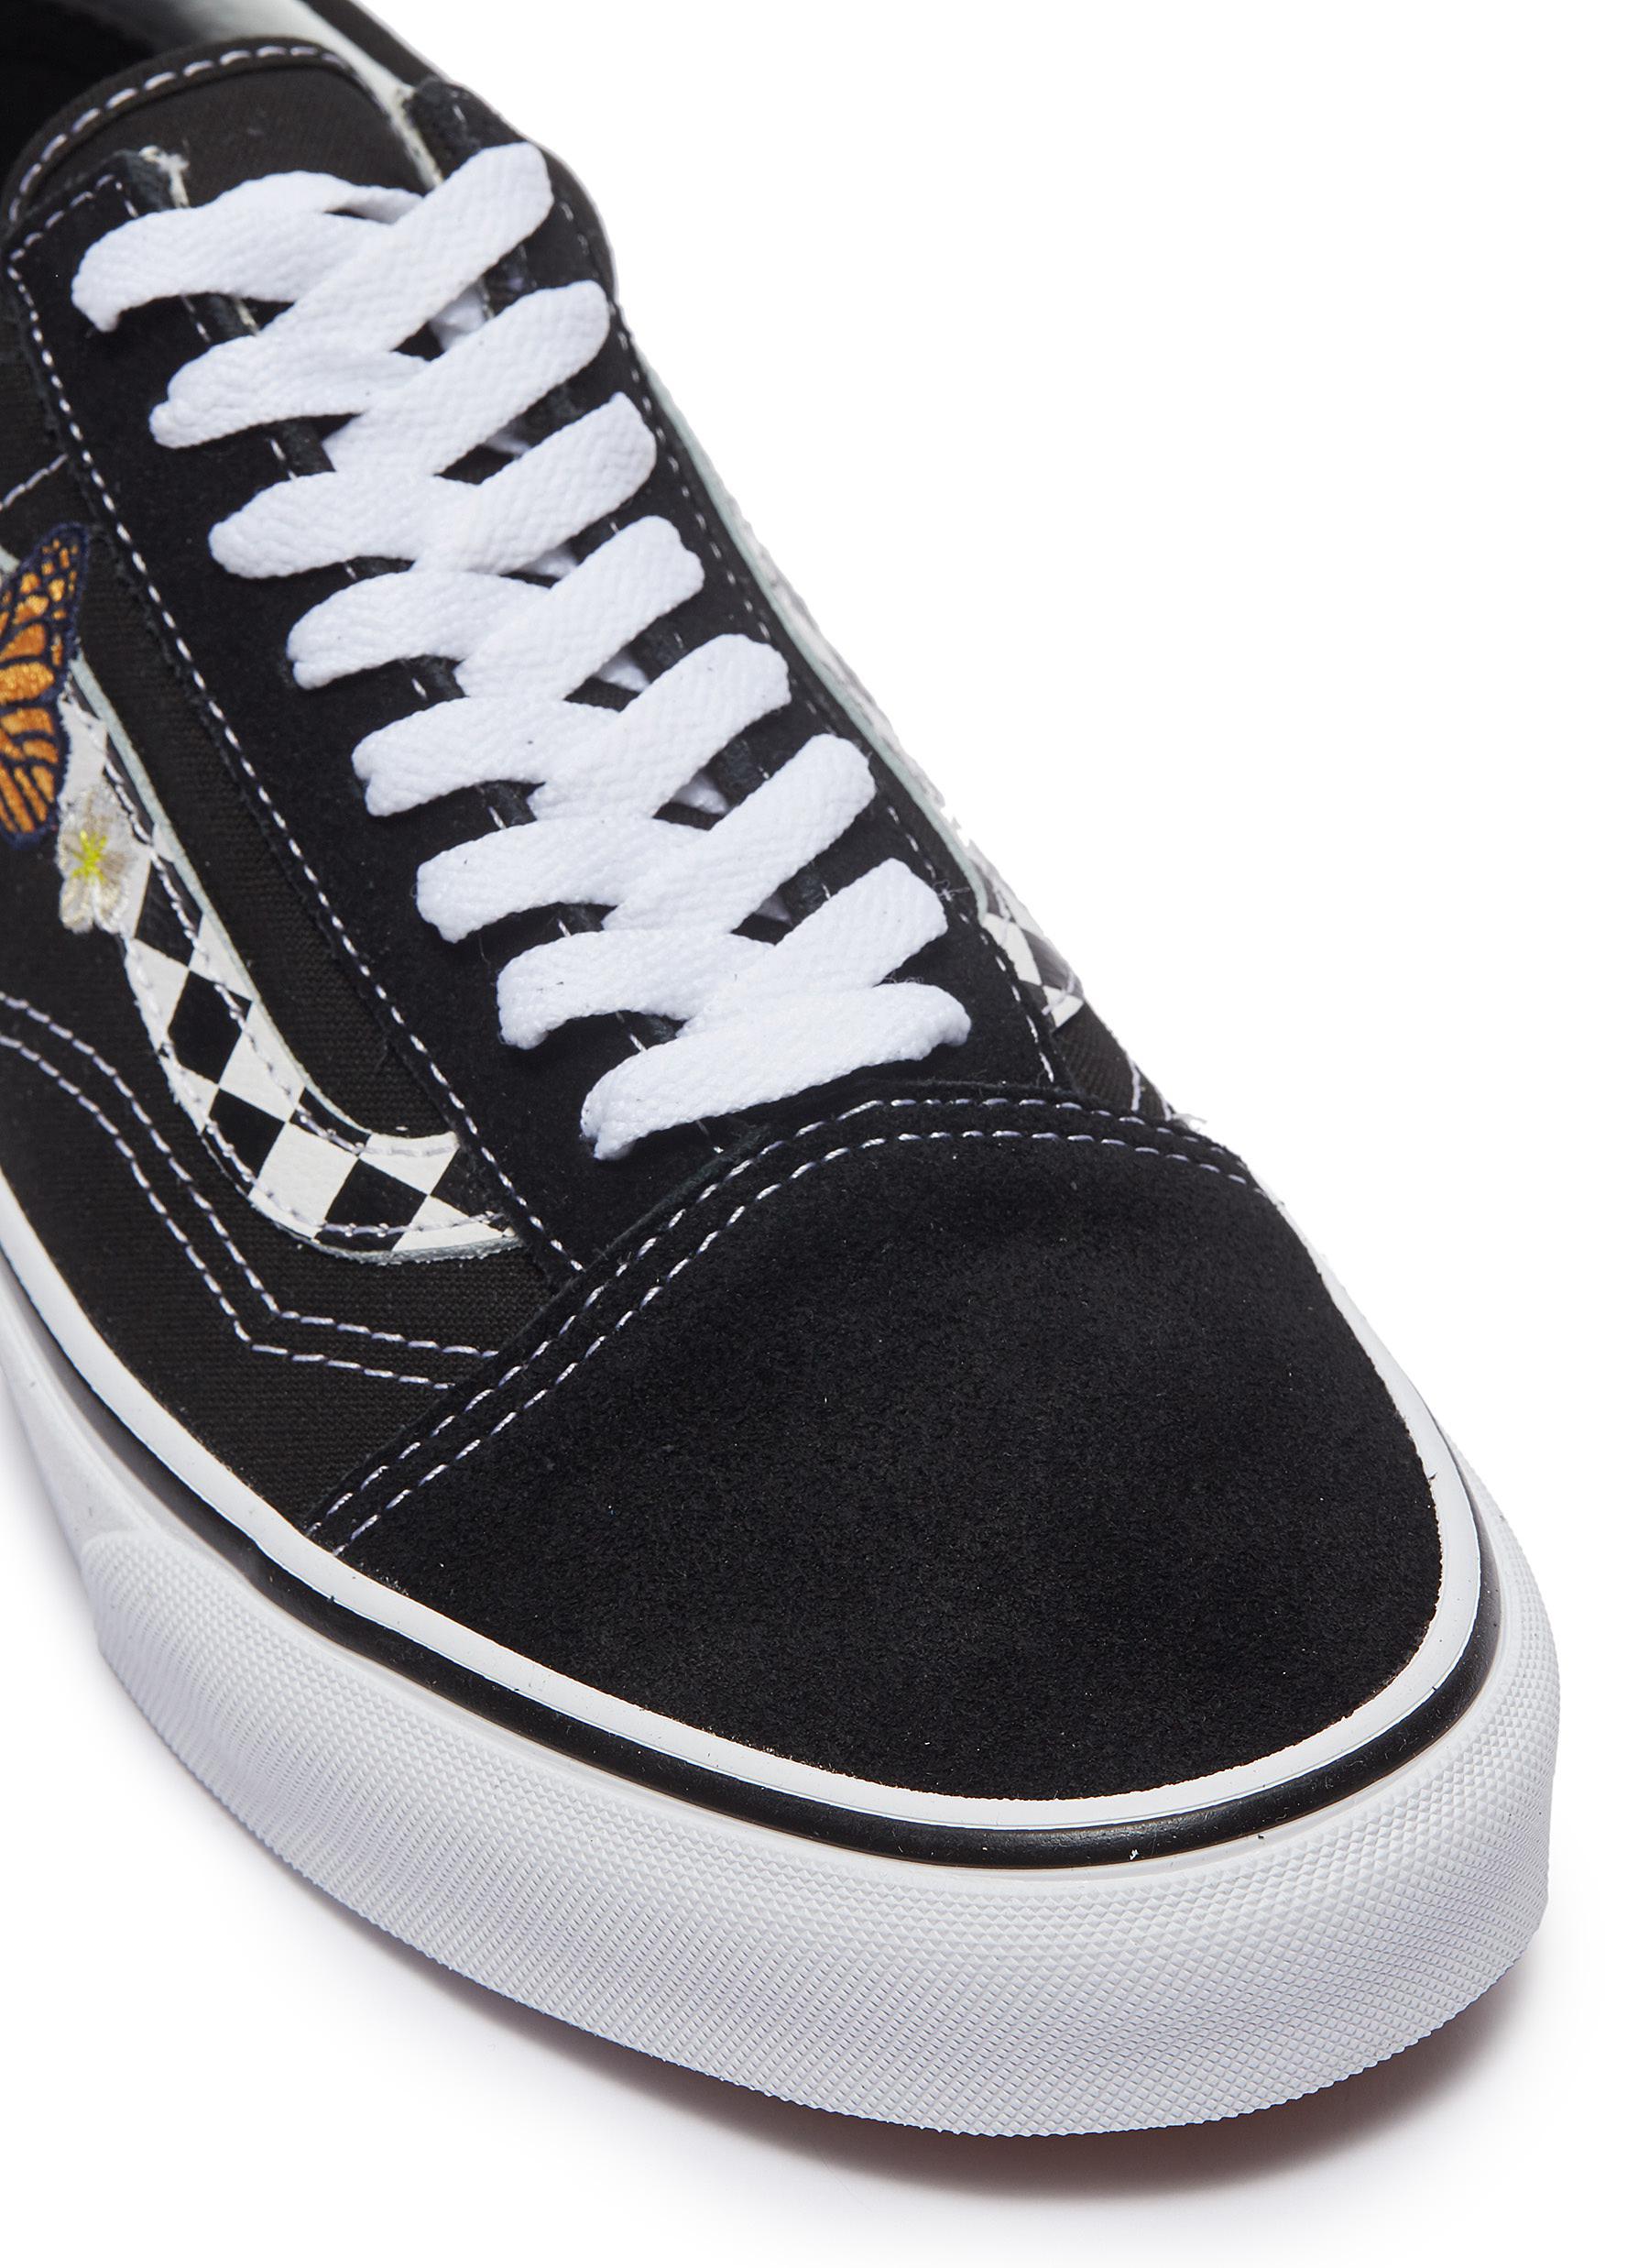 Vans 'checker Floral Old Skool' Graphic Embroidered Sneakers in Black | Lyst